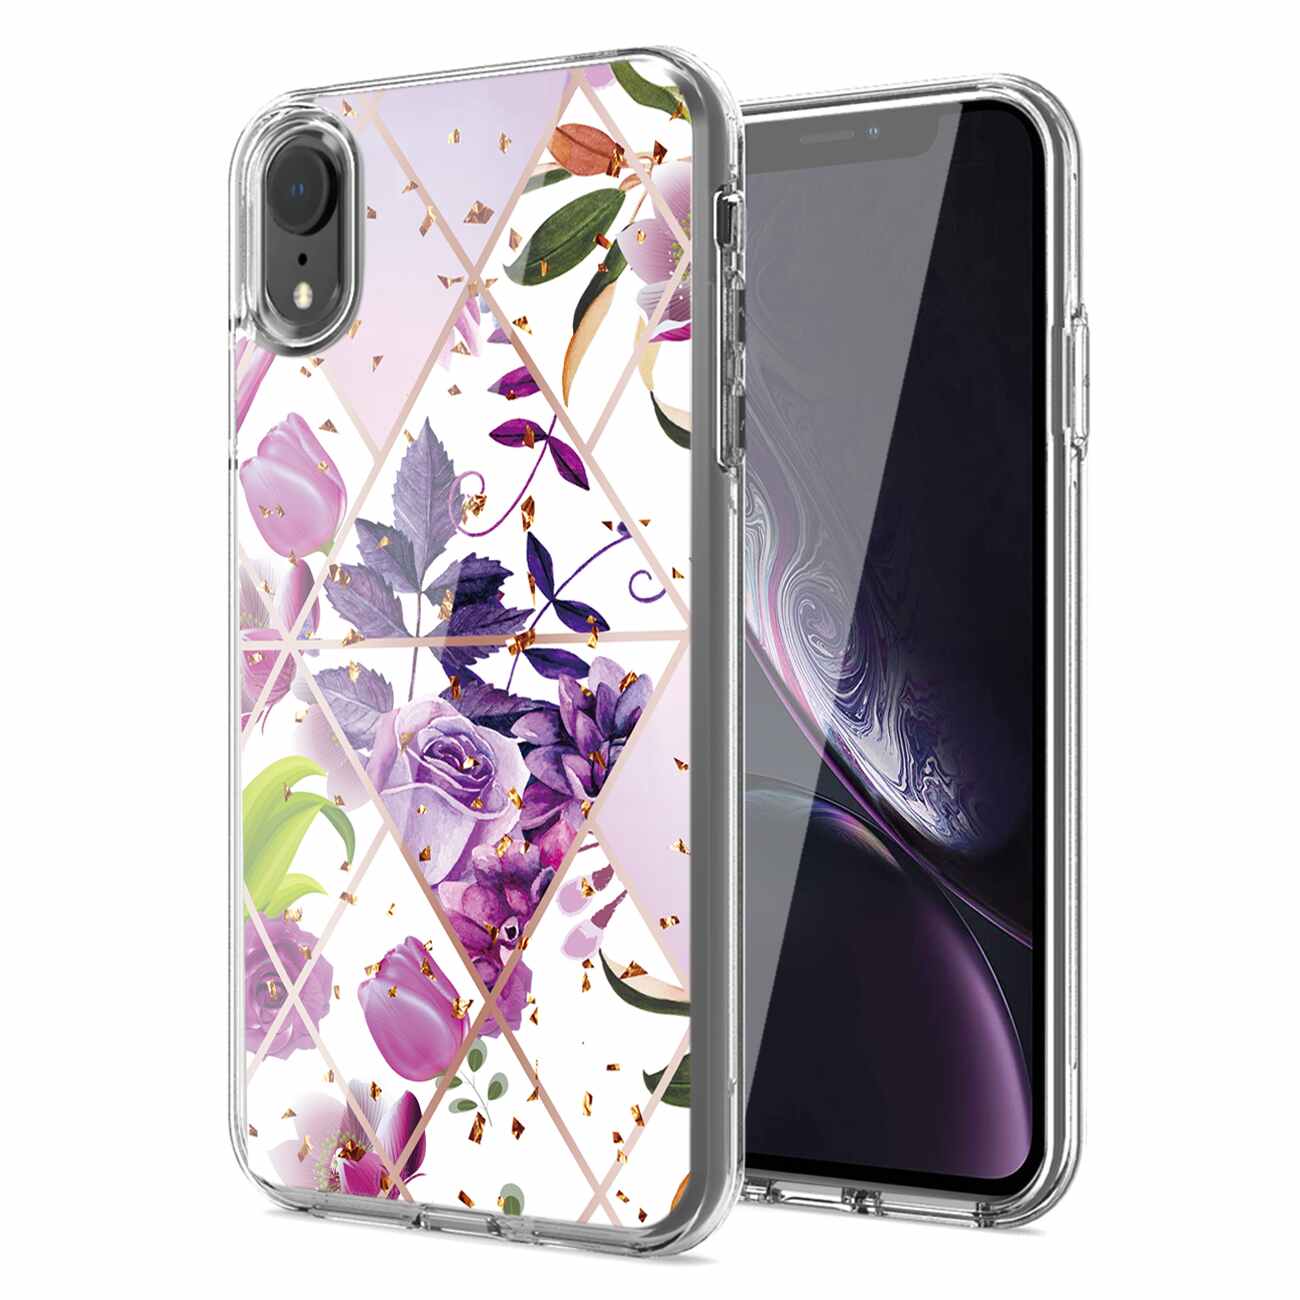 Flower Design Dual Layer Hybrid Hard & Soft TPU Rubber Case for IPH XR In Purple Base Flower